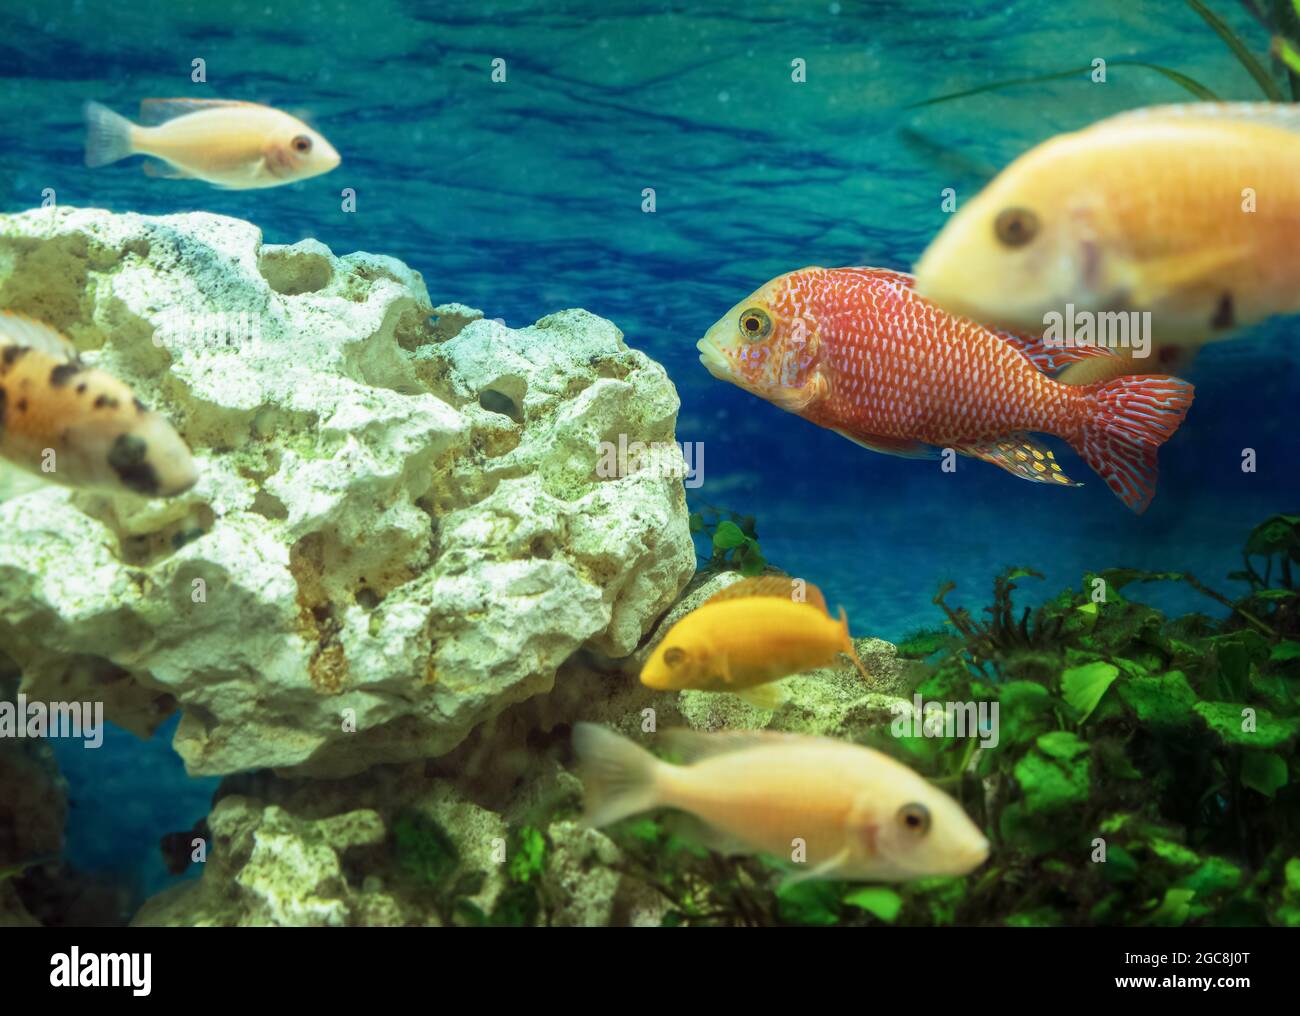 Aulonocara Orchidea Red in focus with dwarf cichlid aulonocara view Stock Photo